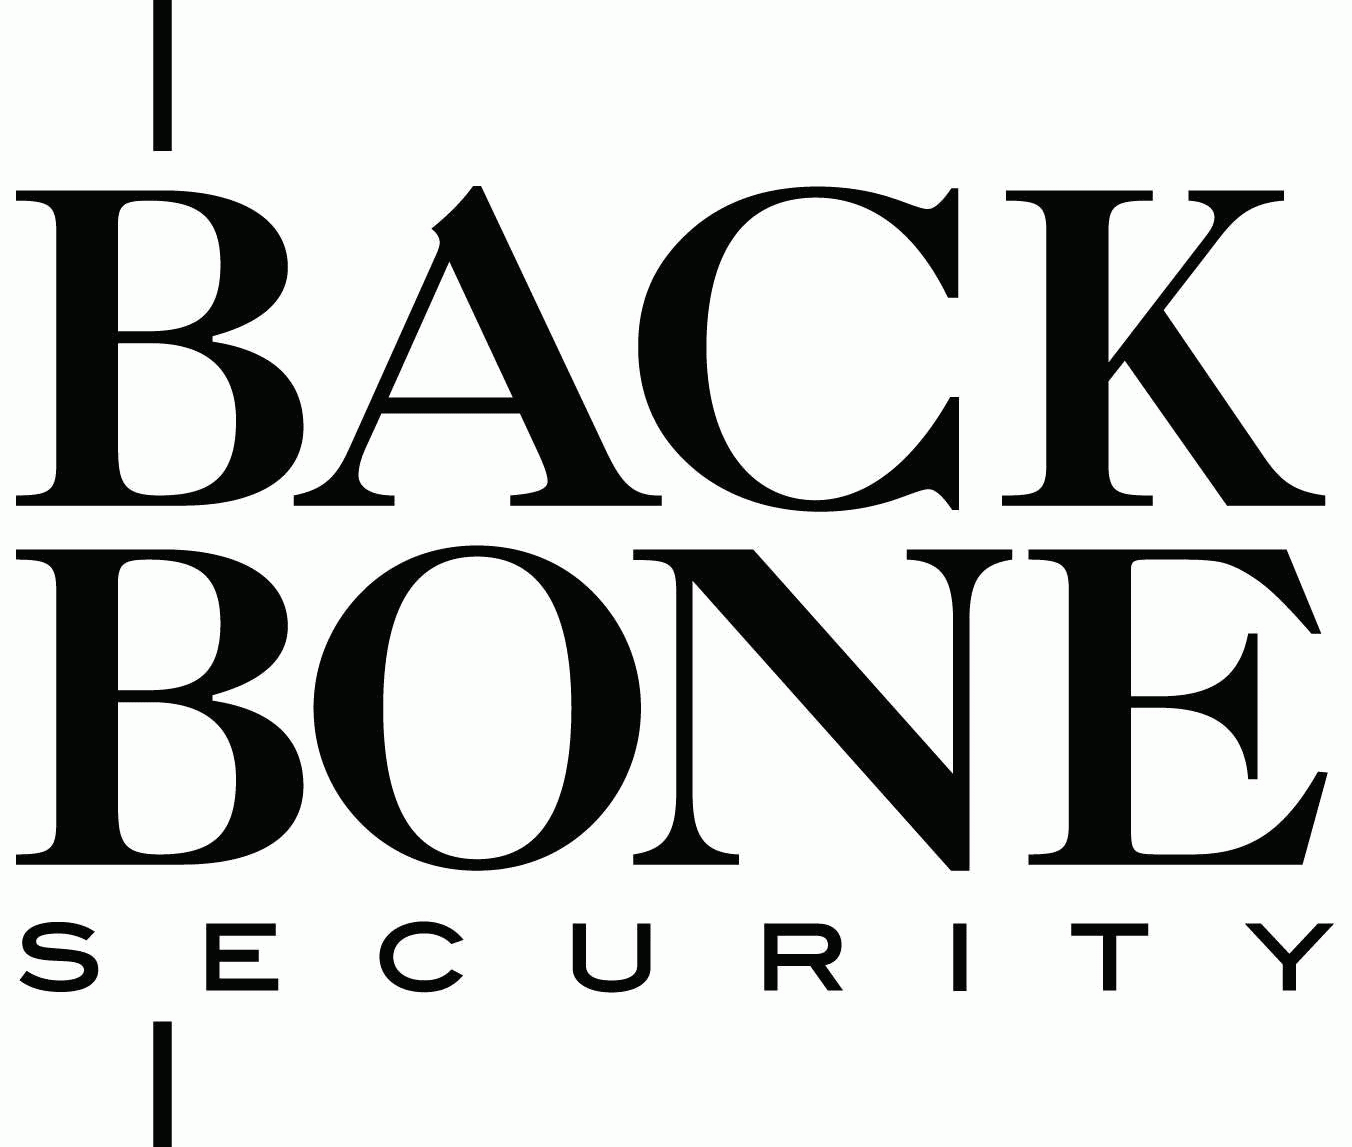 Backbone Security | PCI Approved Scanning Vendor | IT Security Services